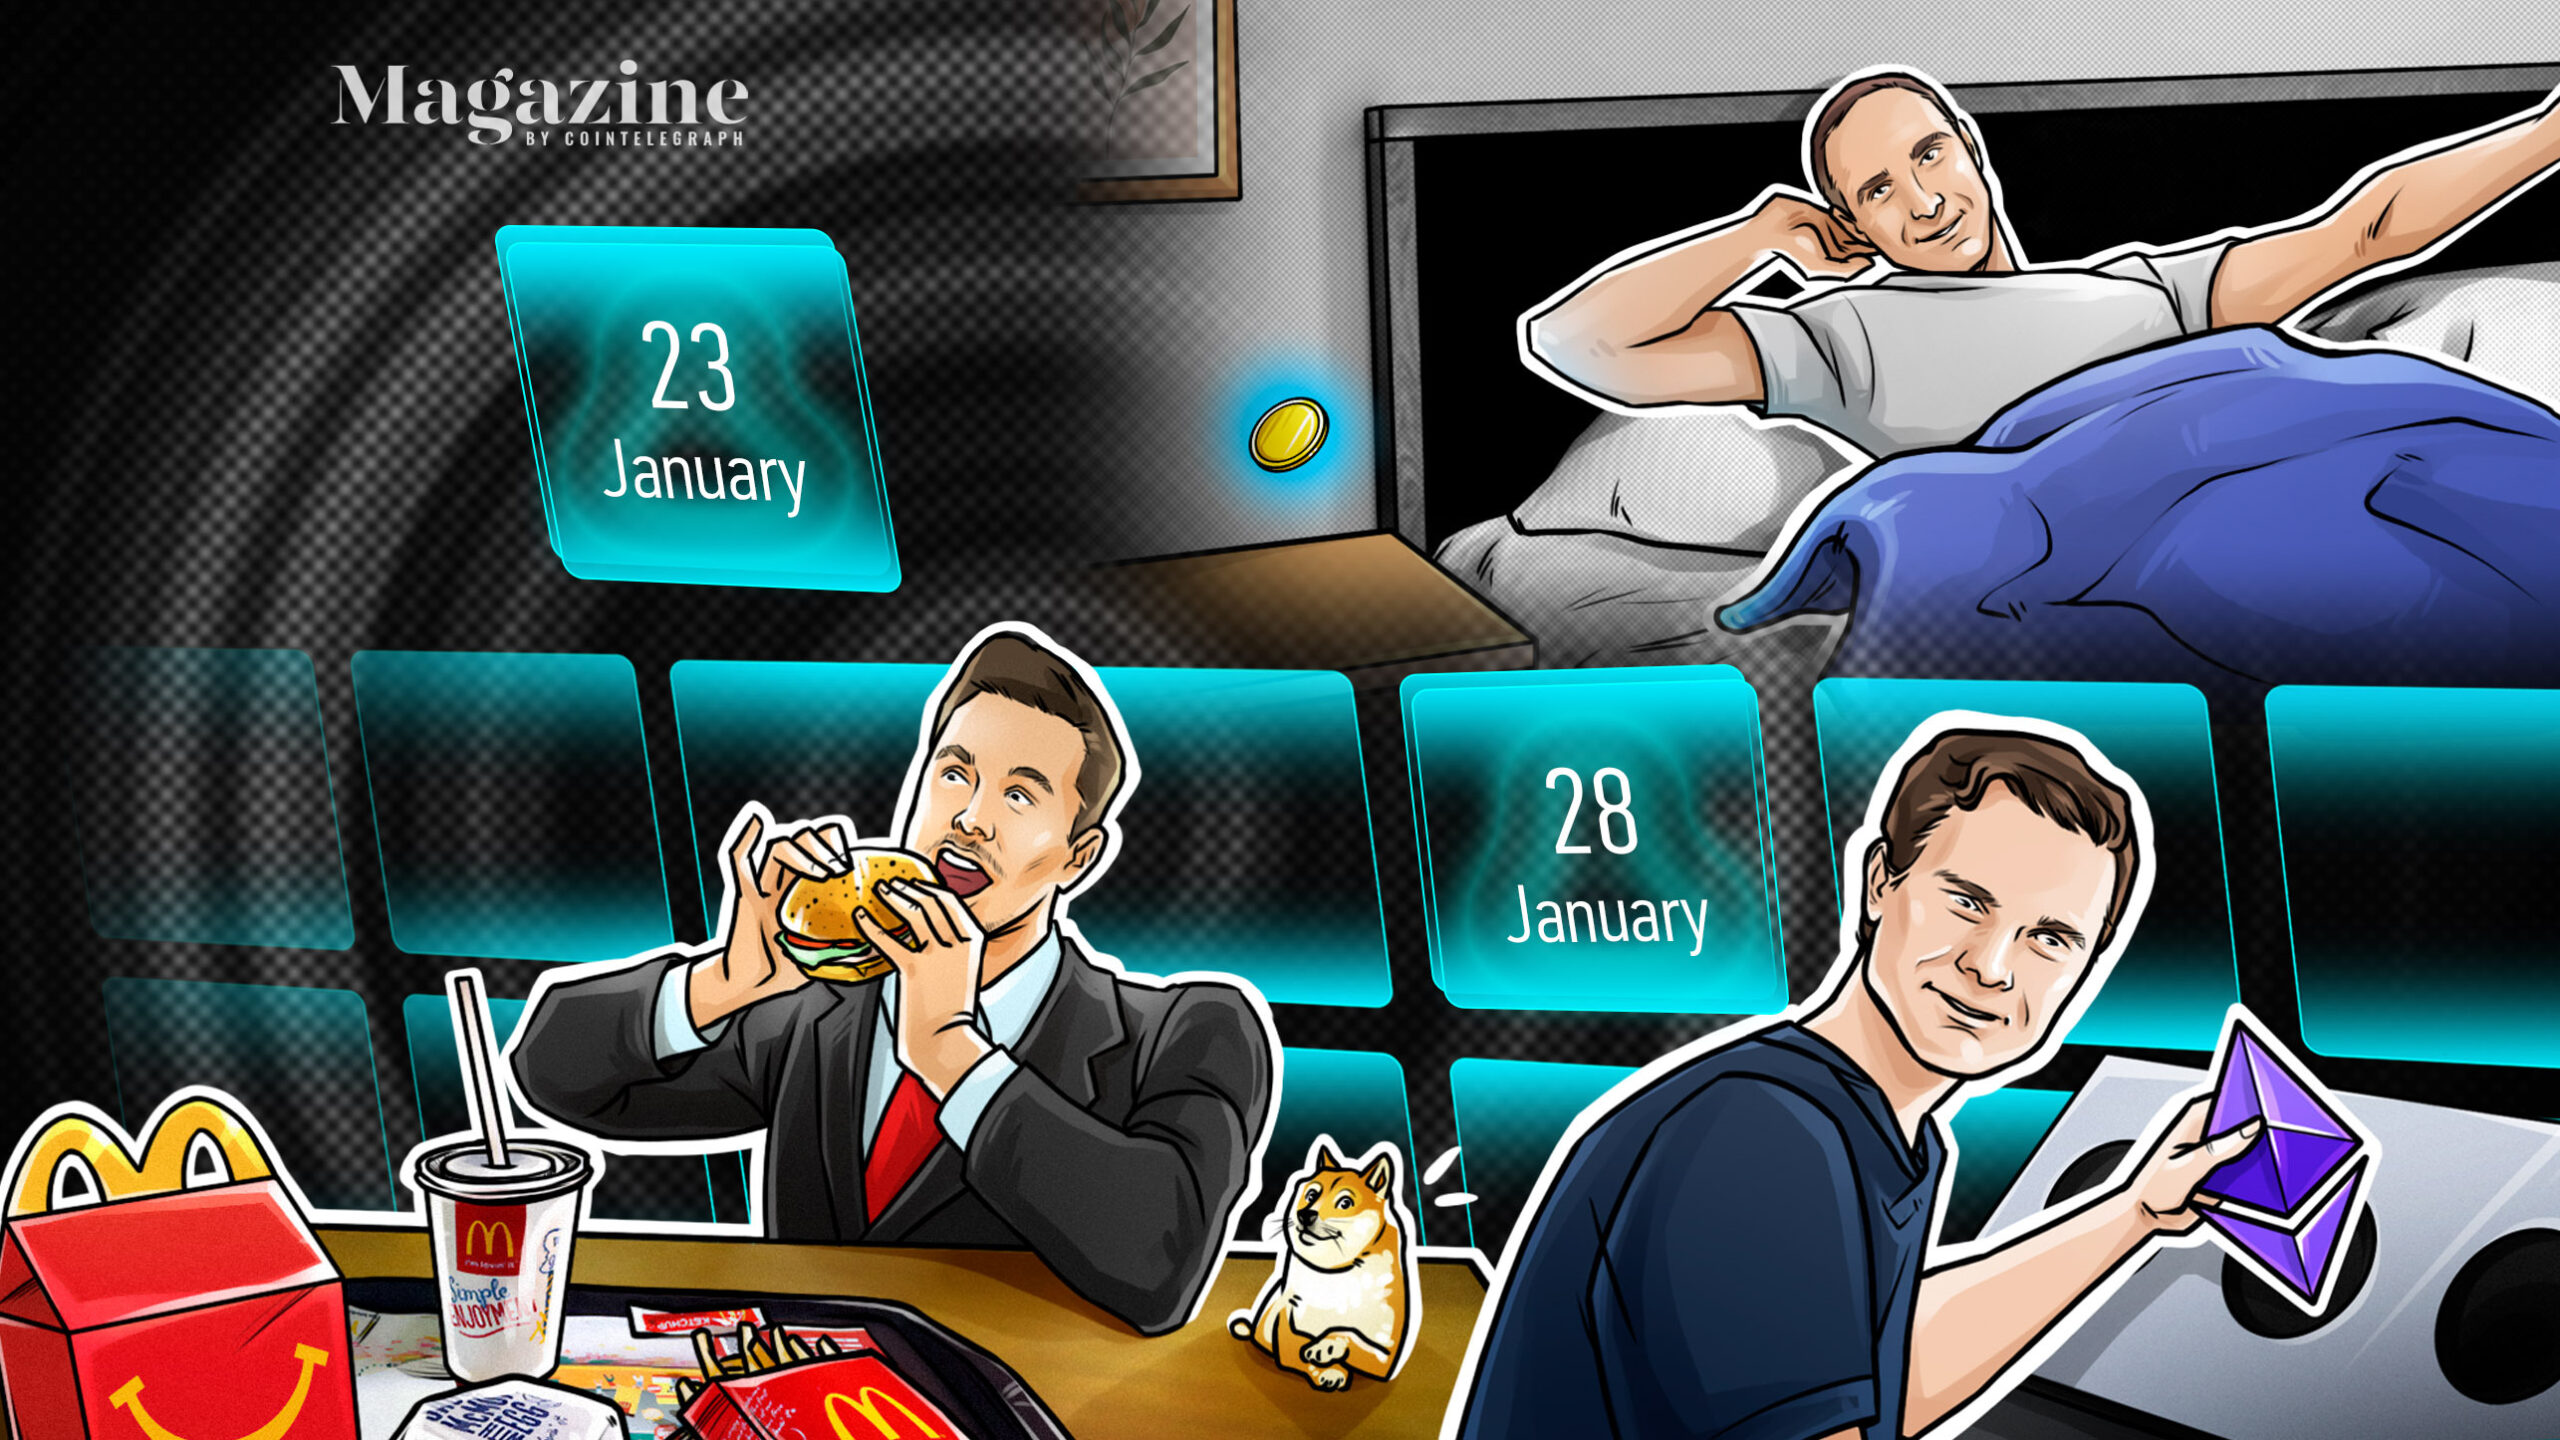 Eth2 rebrands to Consensus Layer, Elon Musk fails to boost DOGE, YouTube gaming head switches to Polygon Studios: Hodler’s Digest, Jan 23-28